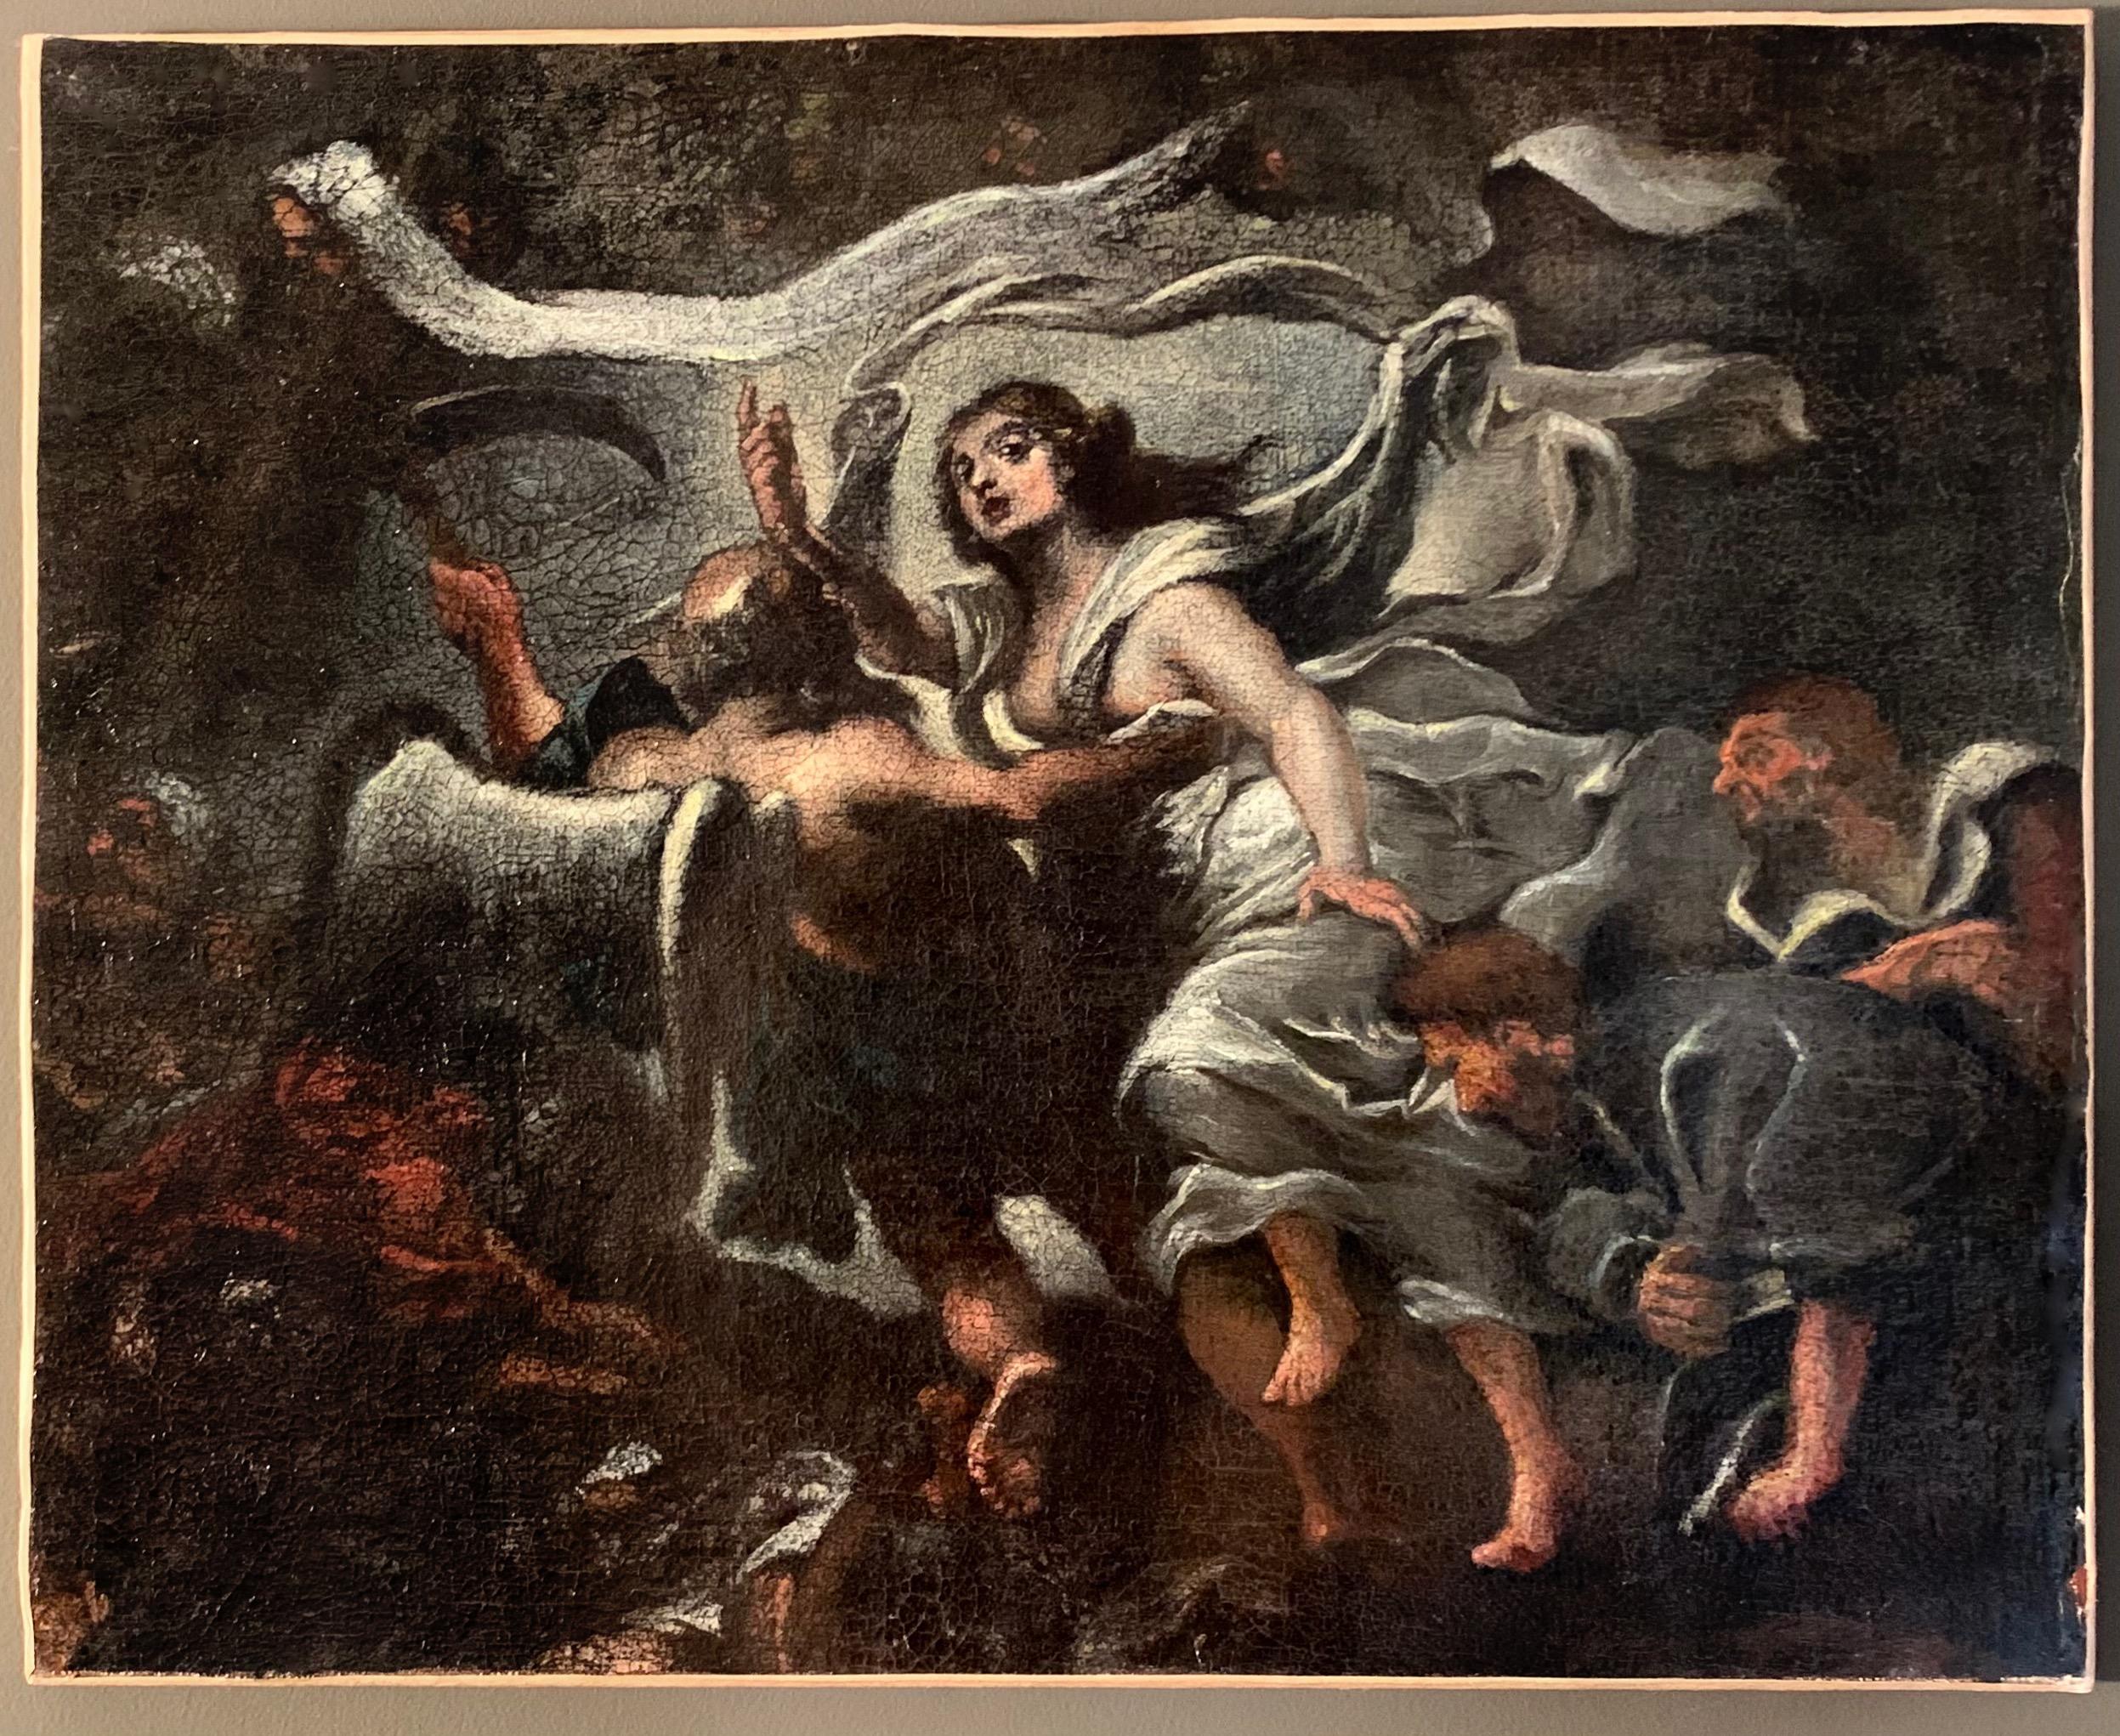 Francesco Solimena Figurative Painting - 17th Century Italian Old Master Painting - Time unveiling truth - Allegory Dark